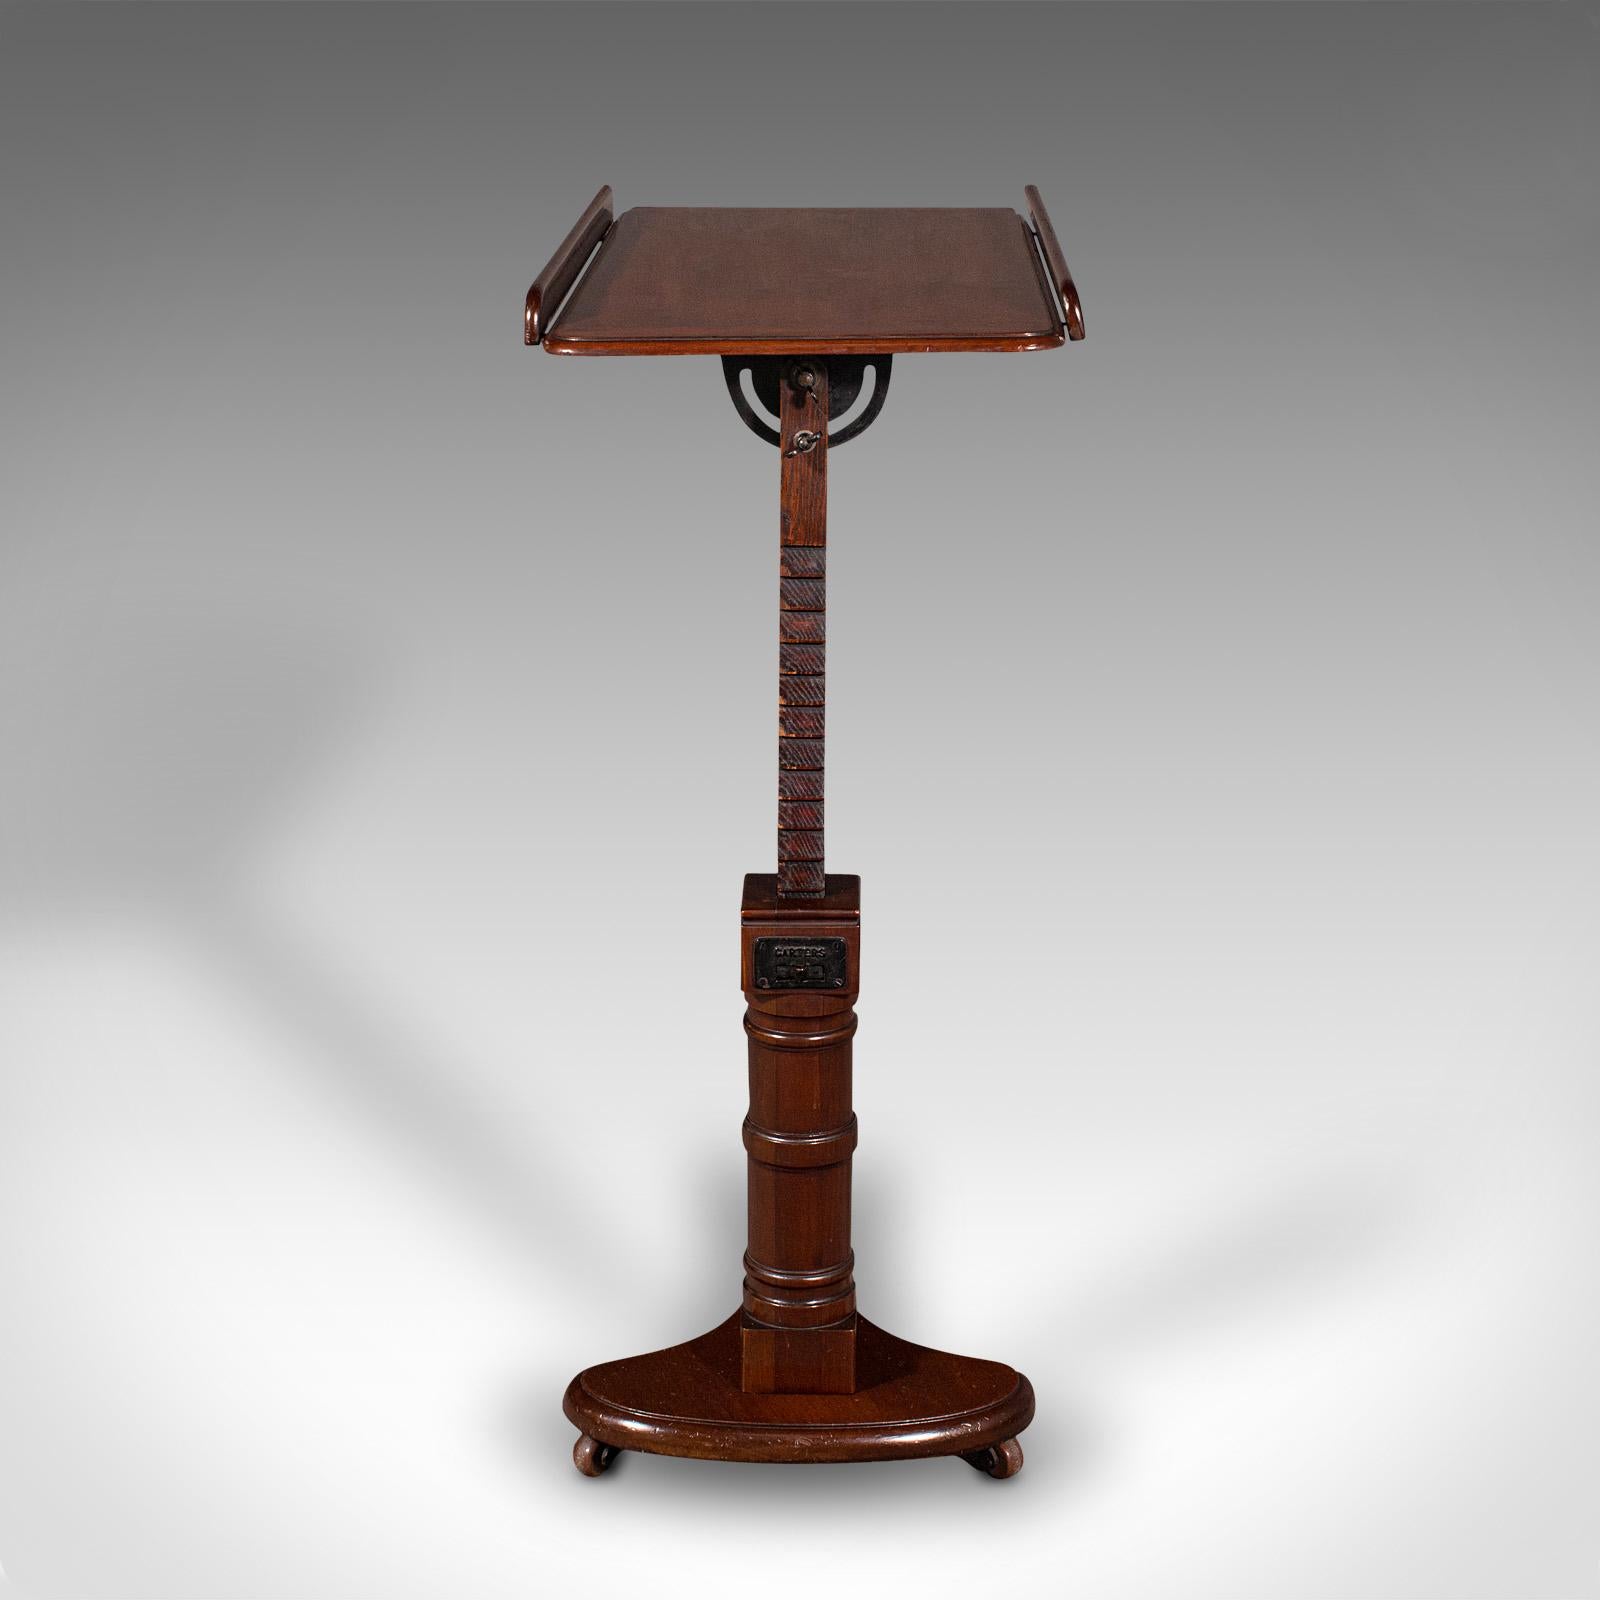 20th Century Antique Adjustable Reading Table, English, Lectern, Recital Stand, Edwardian